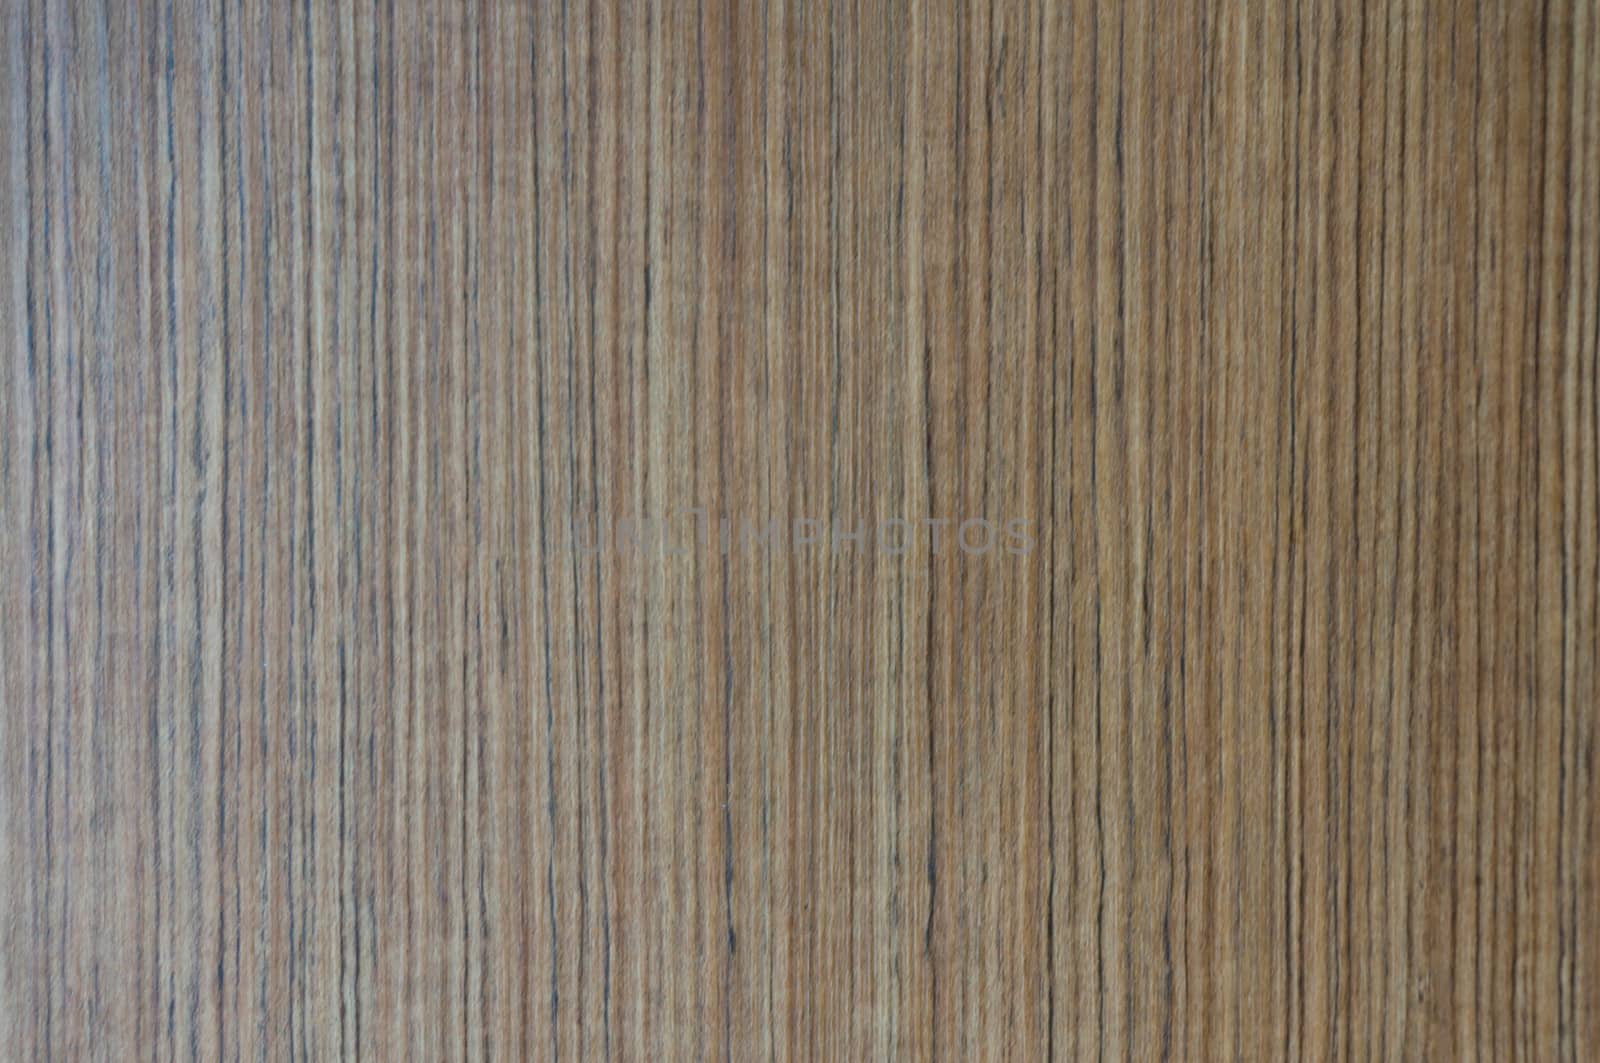 wood texture with natural pattern by peandben